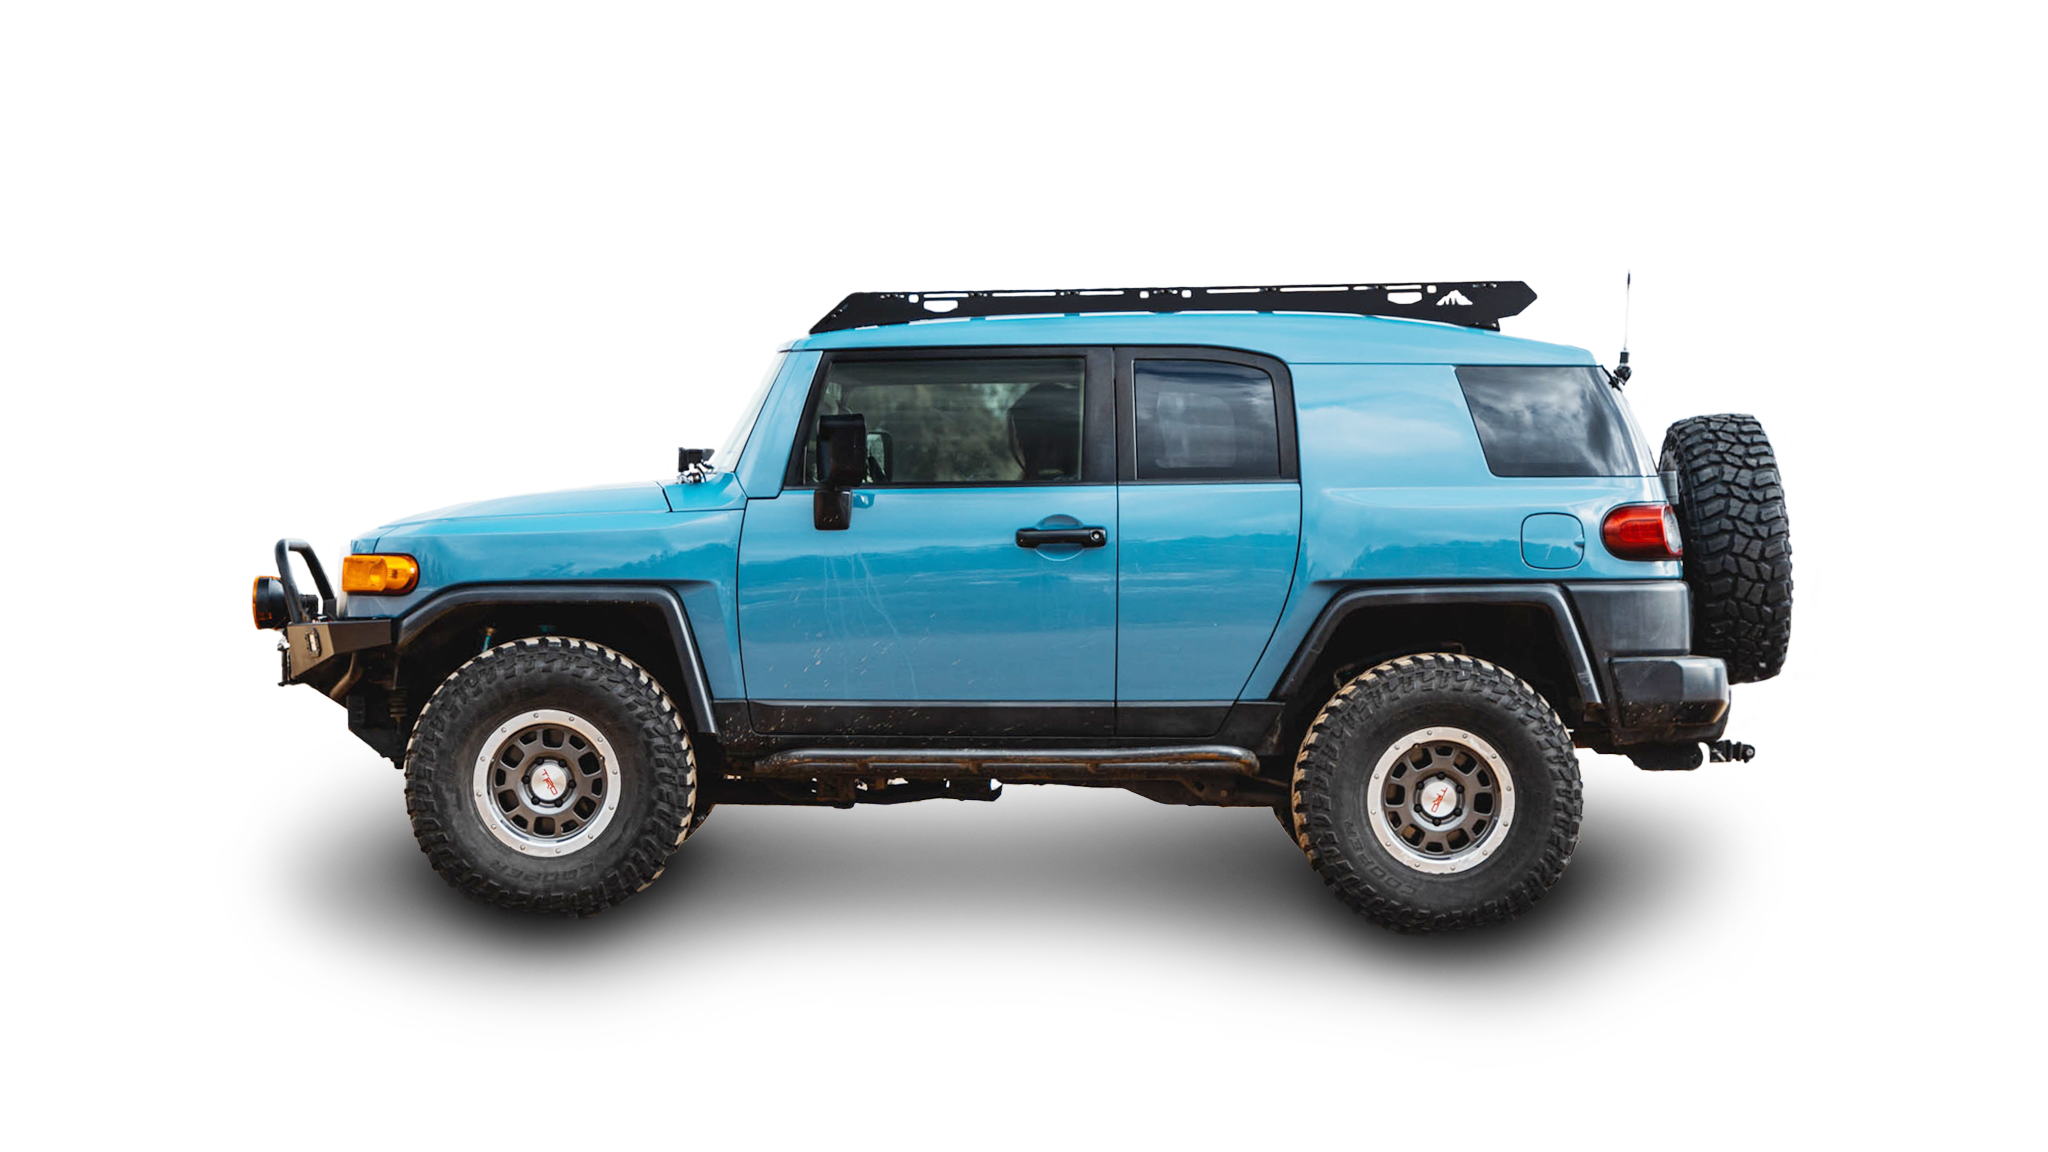 FJ Cruiser Roof Rack Side view of rack on vehicle on white background